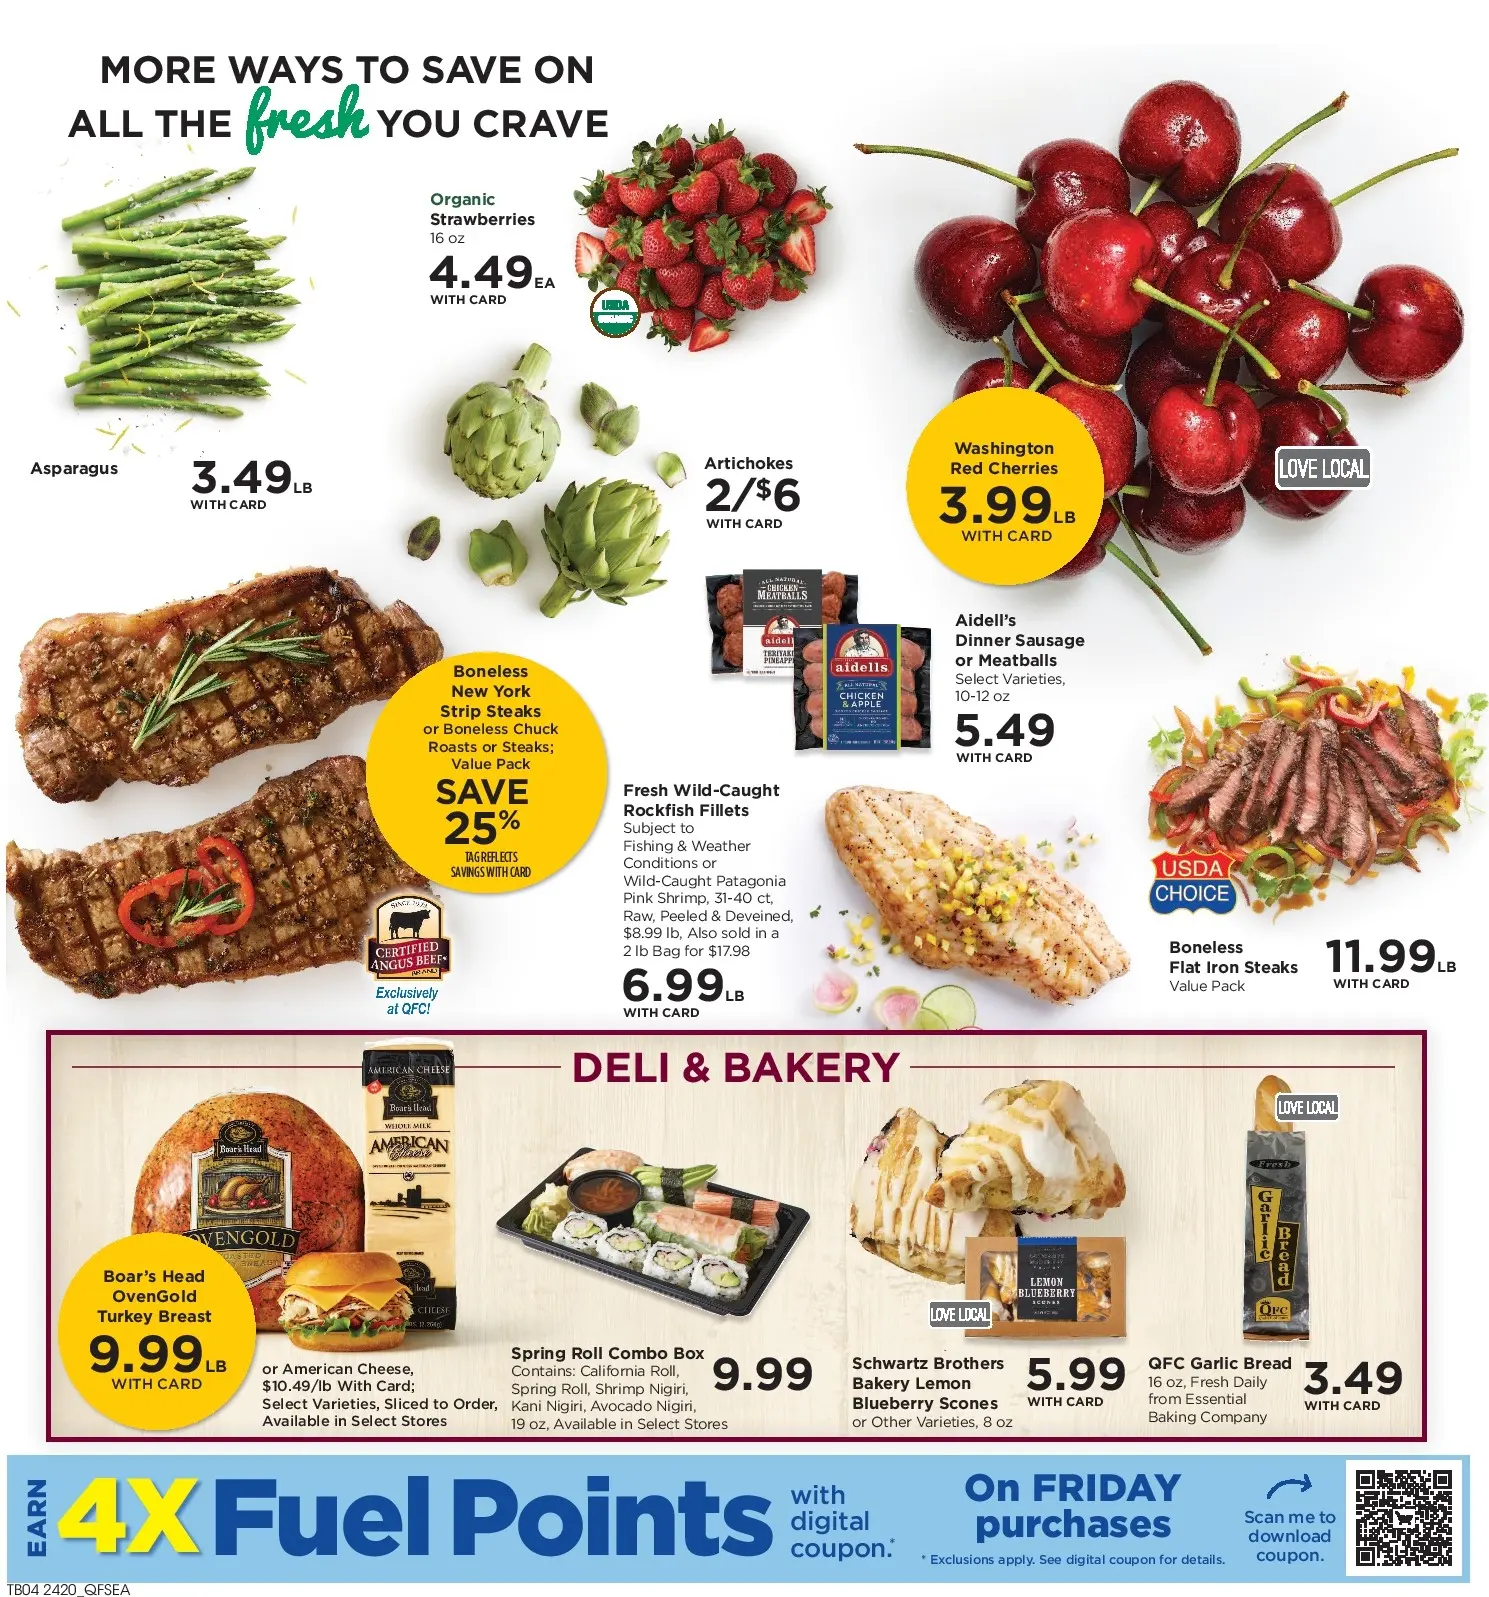 QFC July 2024 Weekly Sales, Deals, Discounts and Digital Coupons.